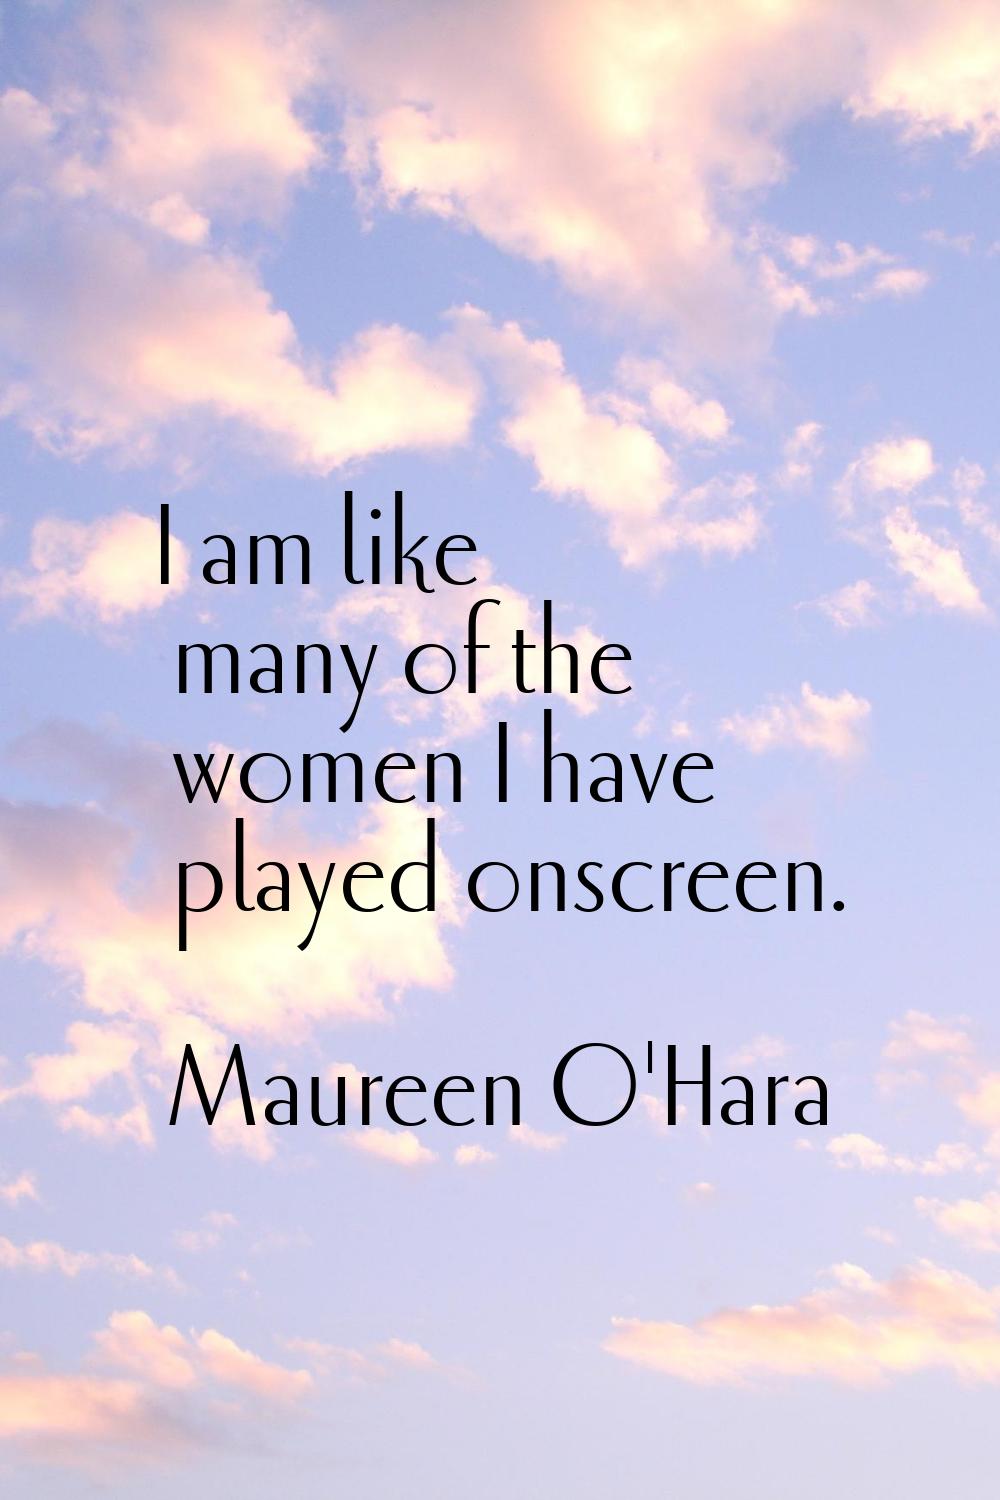 I am like many of the women I have played onscreen.